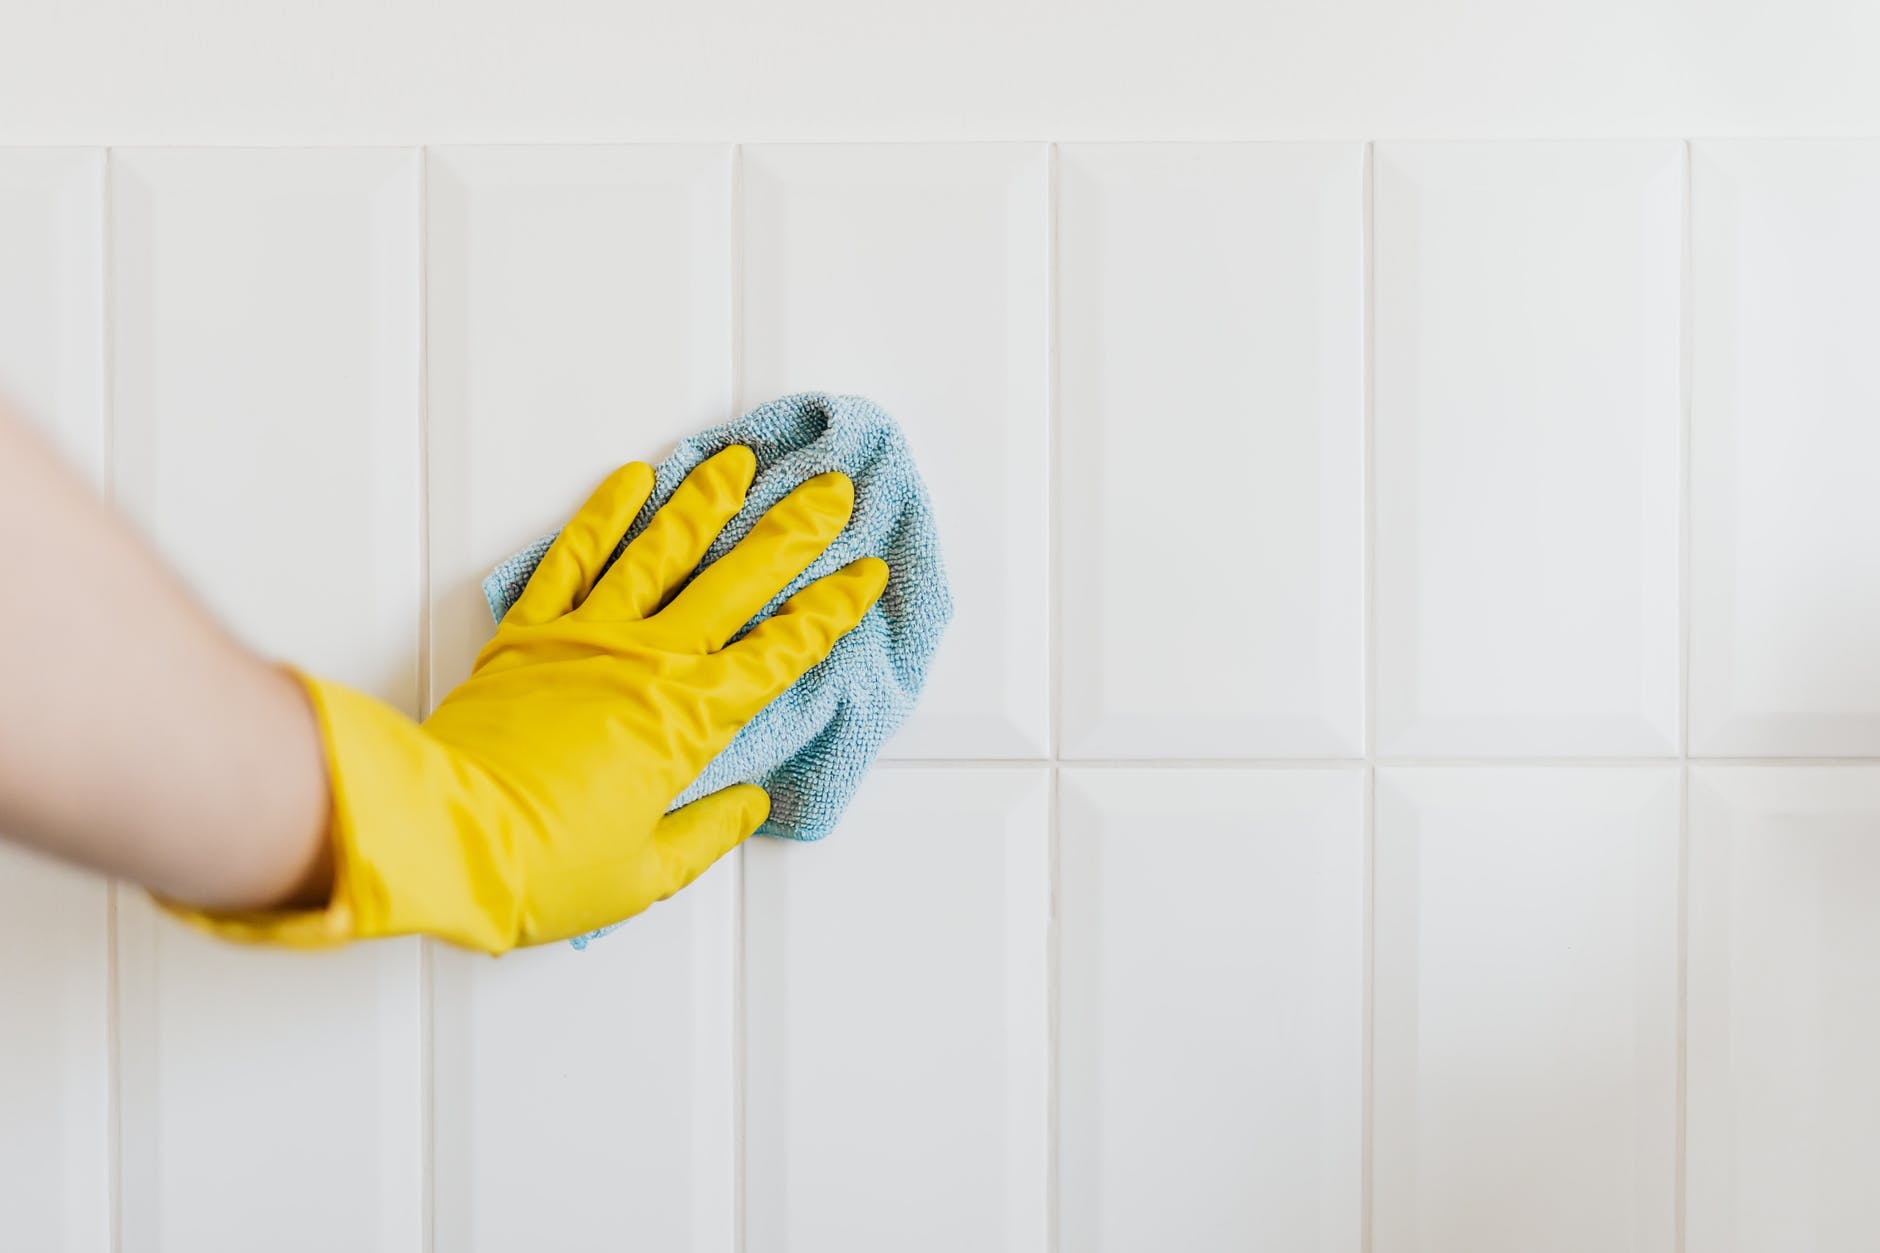 Poverty wage maid from on-demand service cleaning shower tiles

Photo by Karolina Grabowska on Pexels.com